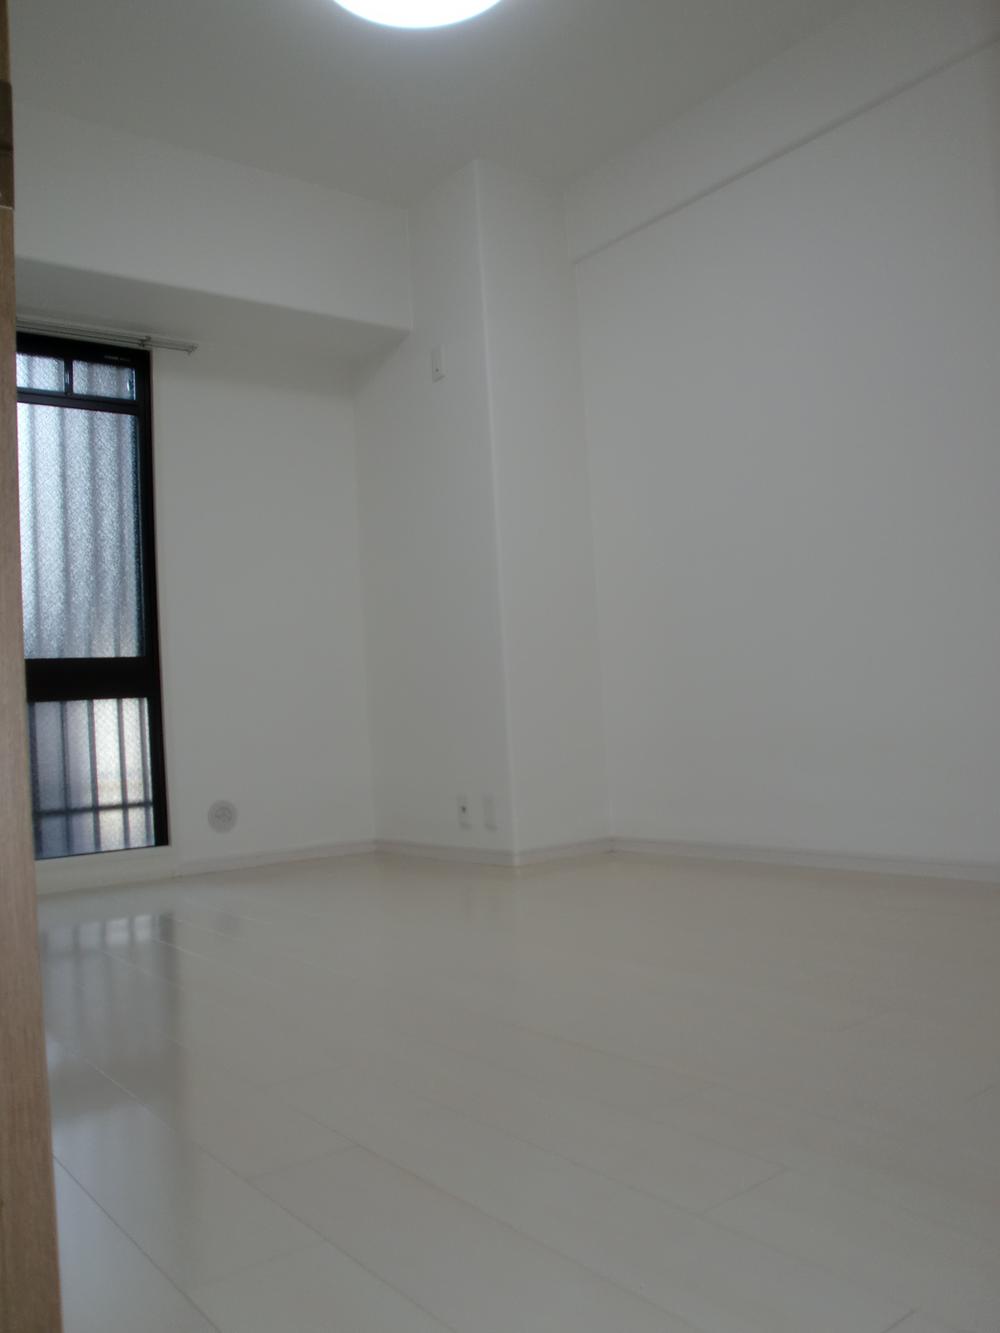 Non-living room. Western-style feel widely in the flooring of white.